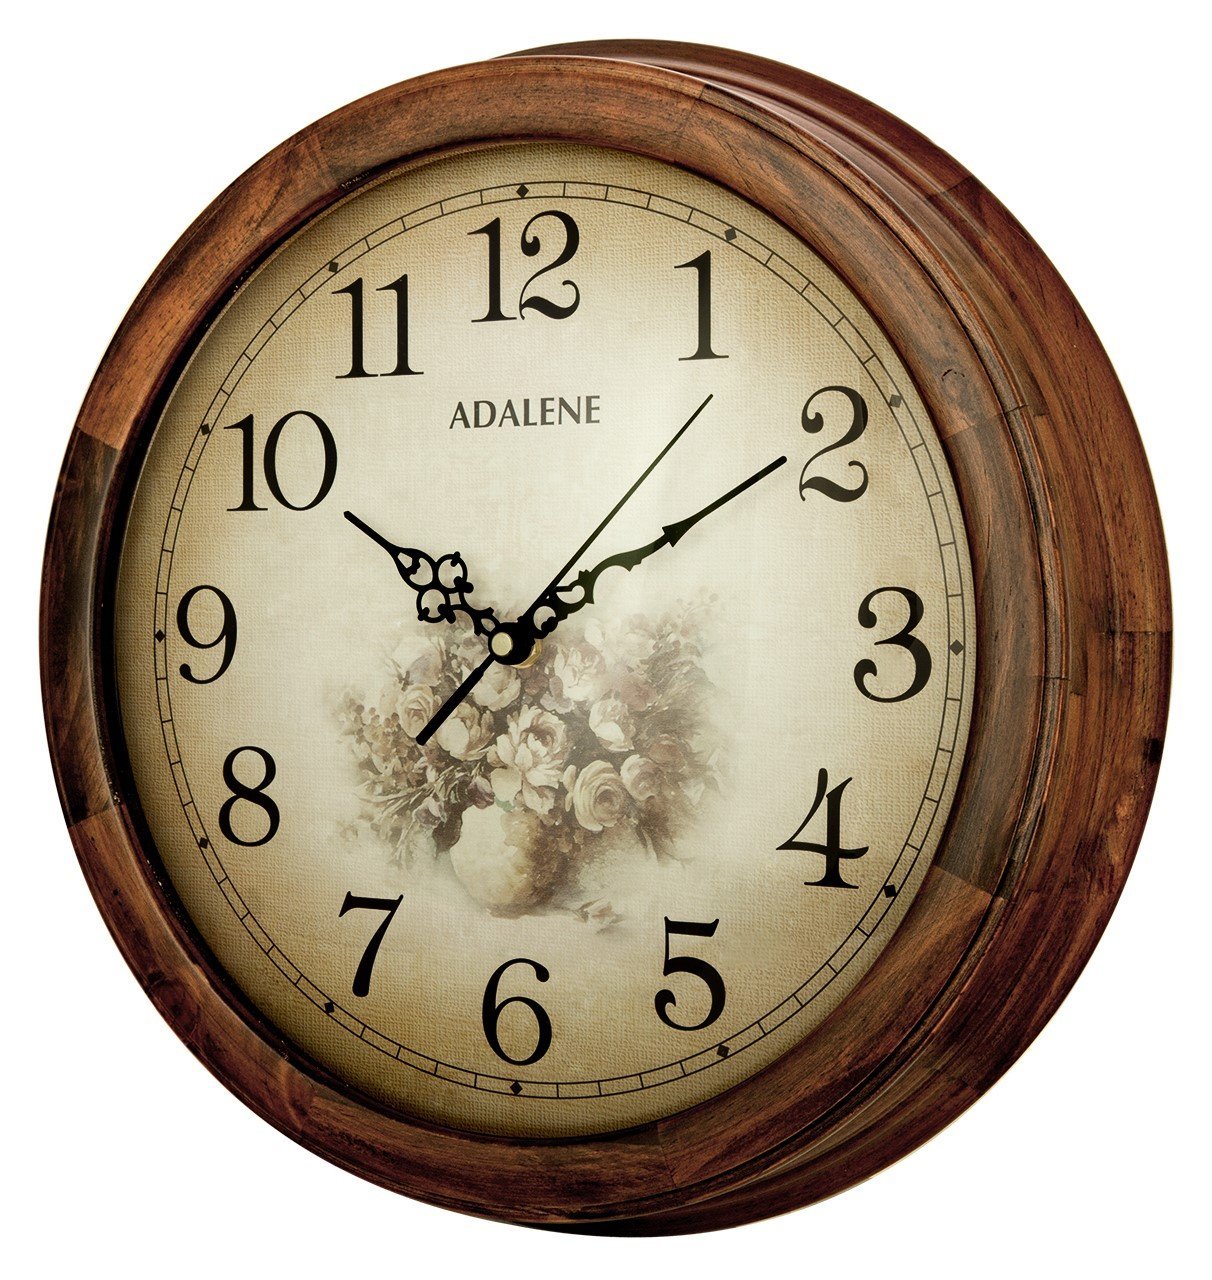 Adalene 14-Inch Wall Clock Large Decorative Living Room Clock - Quiet Battery Operated Quartz Analog Silent Wood Wall Clock - Round Sepia Flower Dial with Fancy Arabic Numerals, Wooden Frame